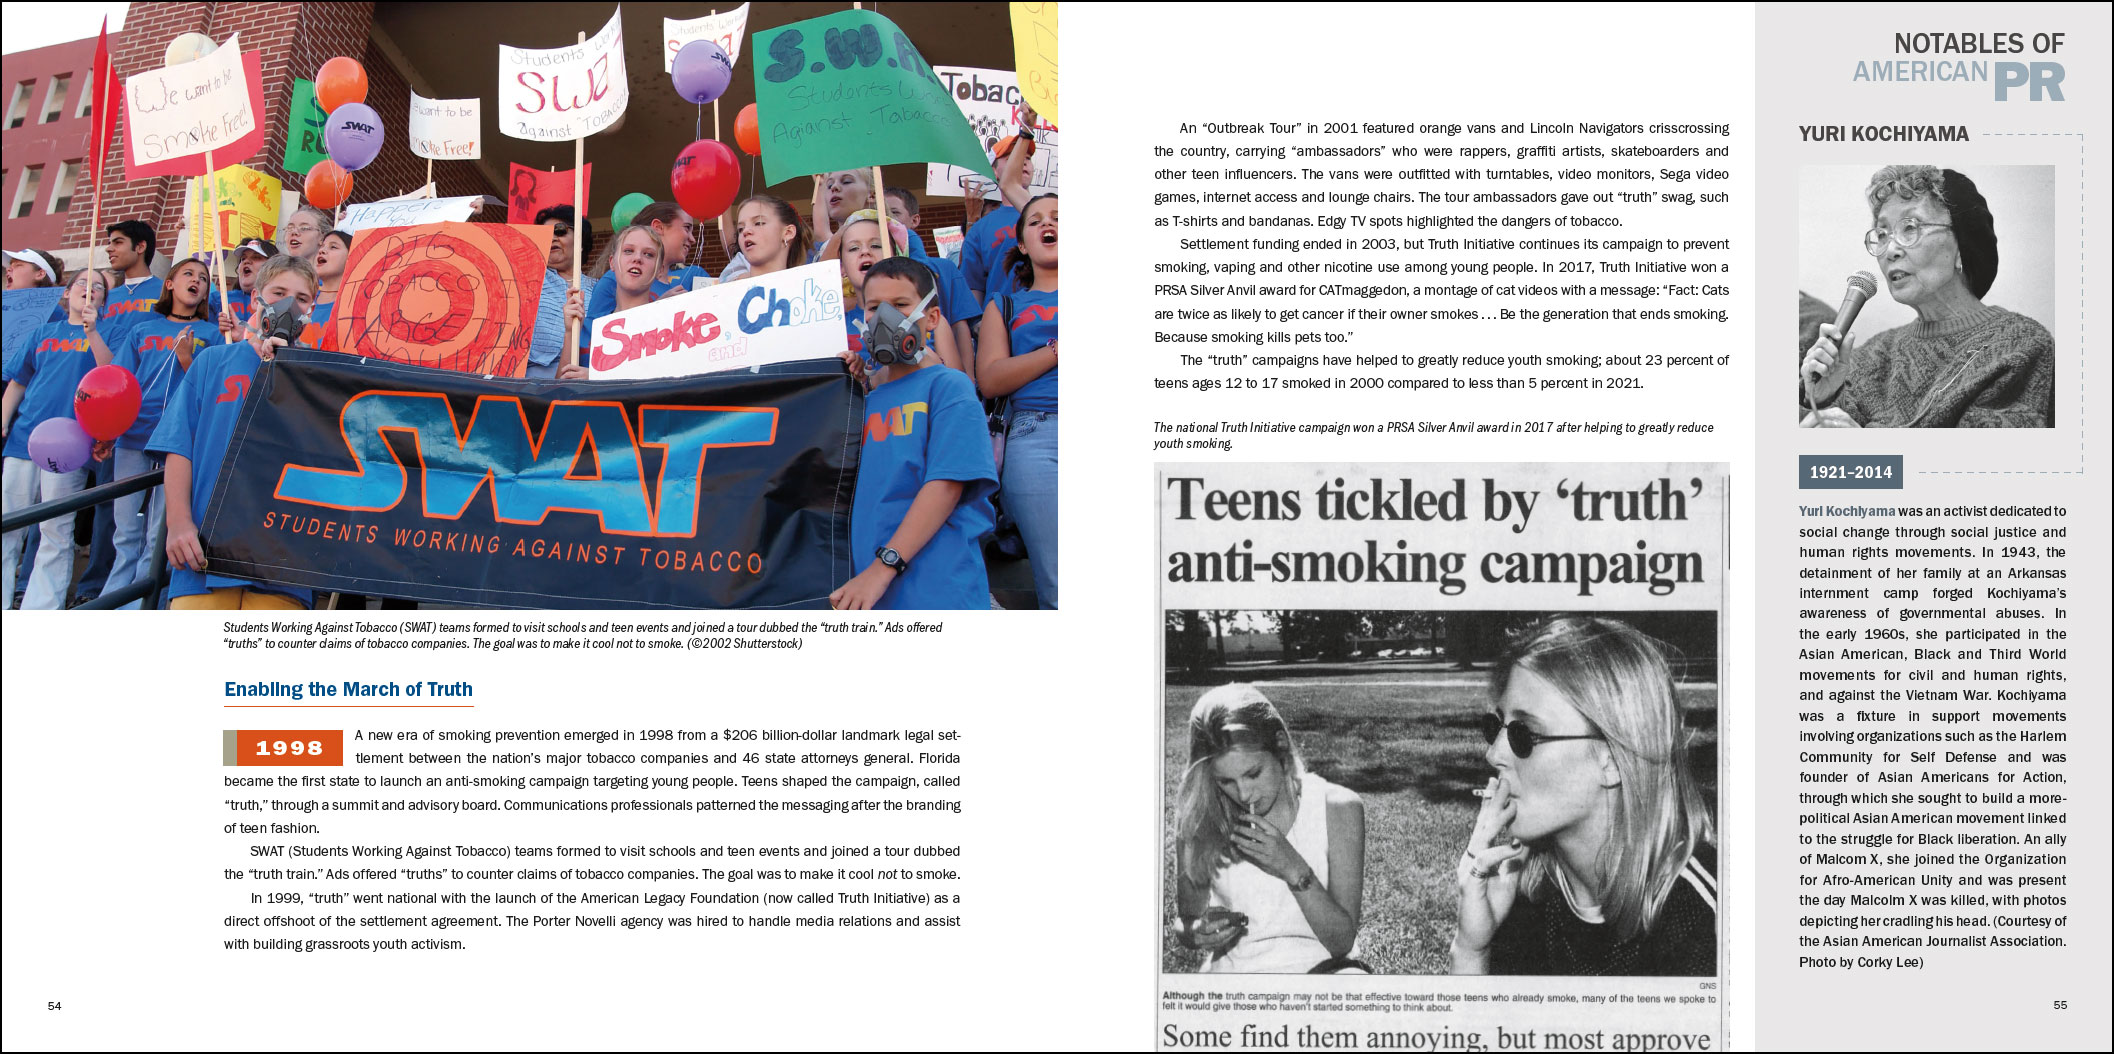 book spread with protesters